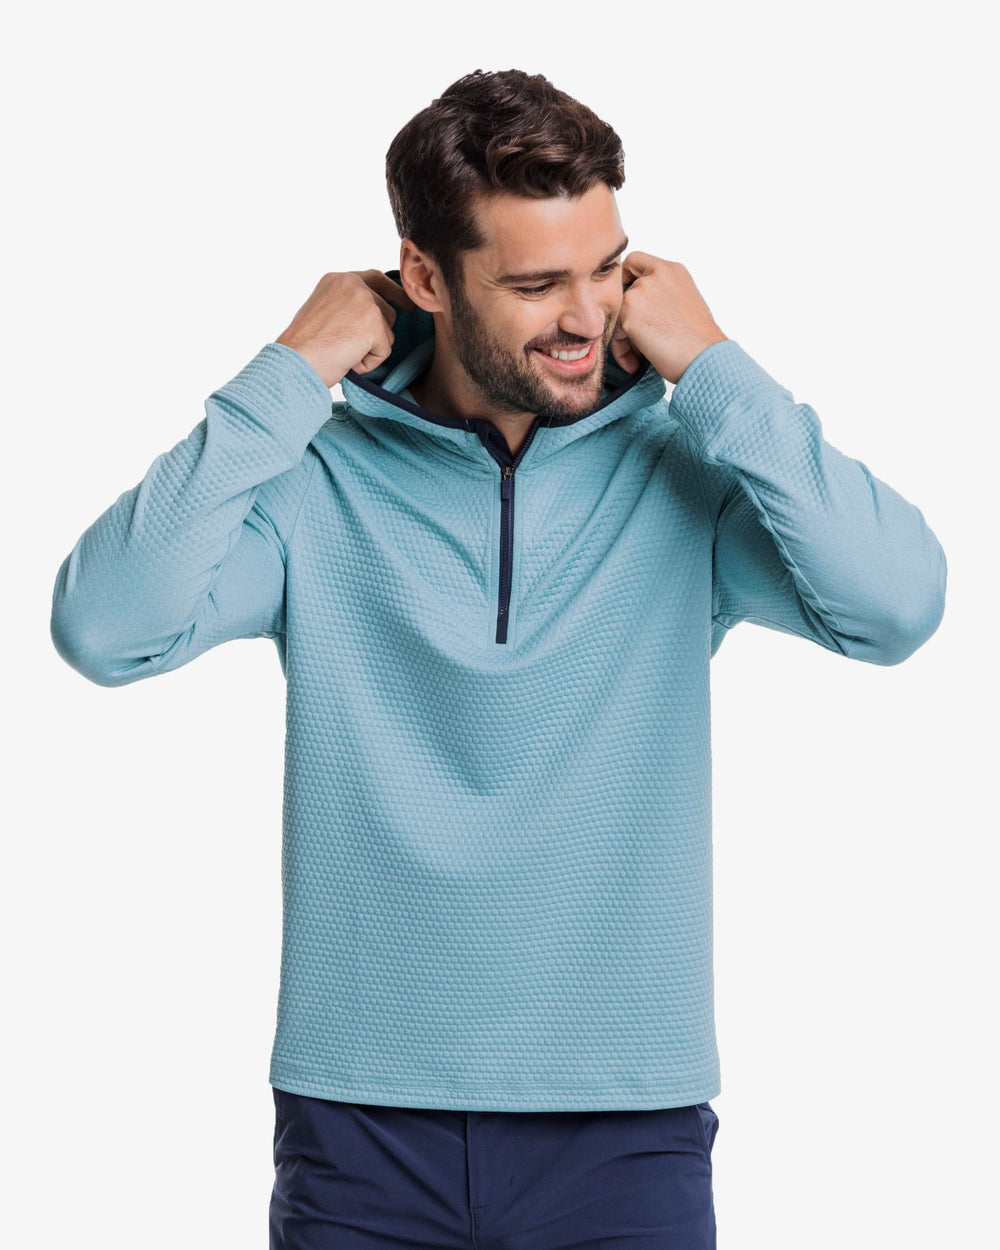 The front hood view of the Southern Tide Scuttle Heather Performance Quarter Zip Hoodie by Southern Tide - Heather Ocean Teal